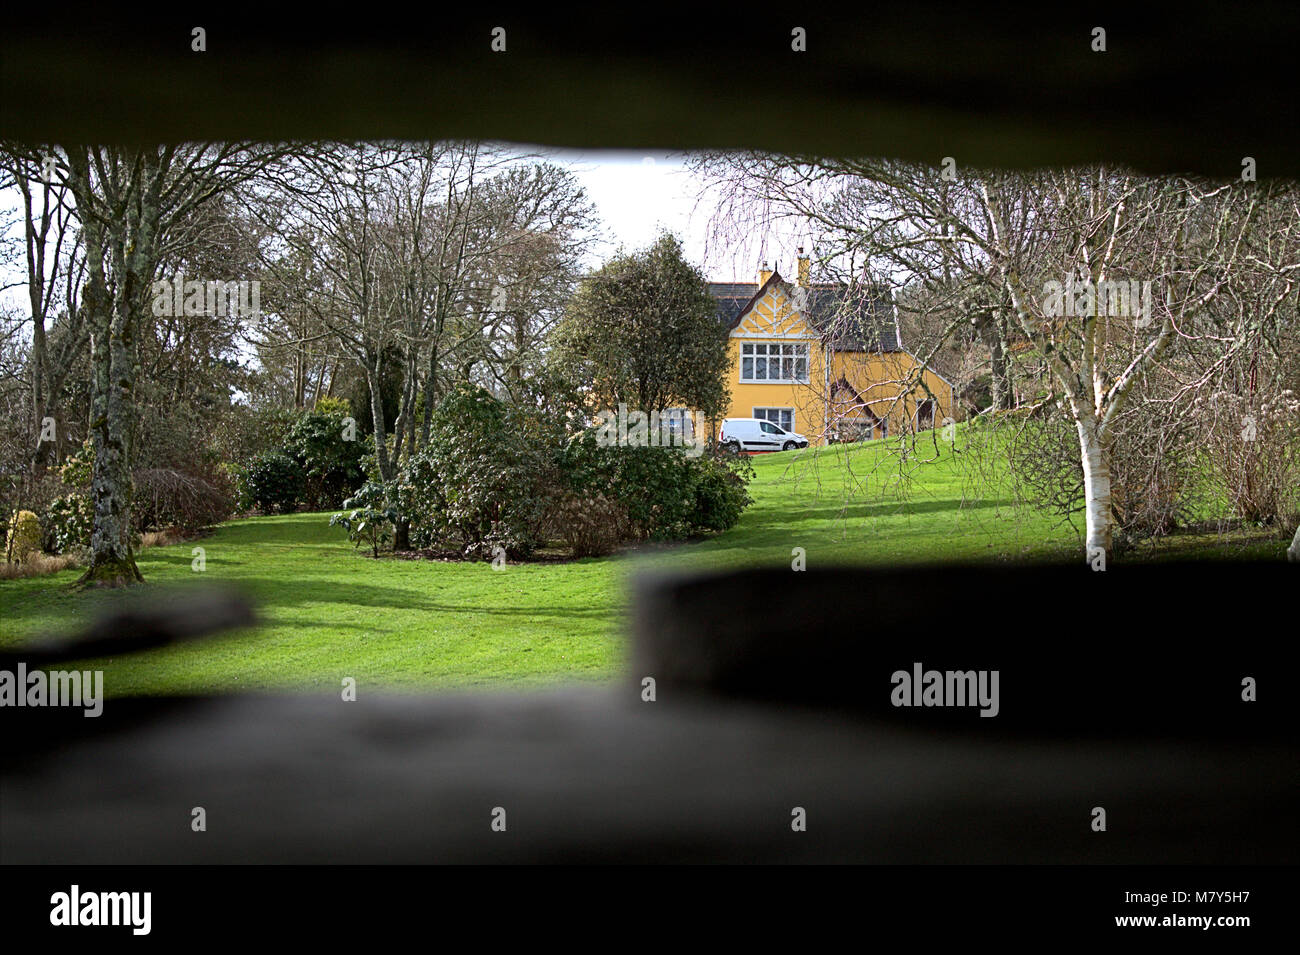 View through hole of house and gardens in the distance through a hole in the wall. Stock Photo